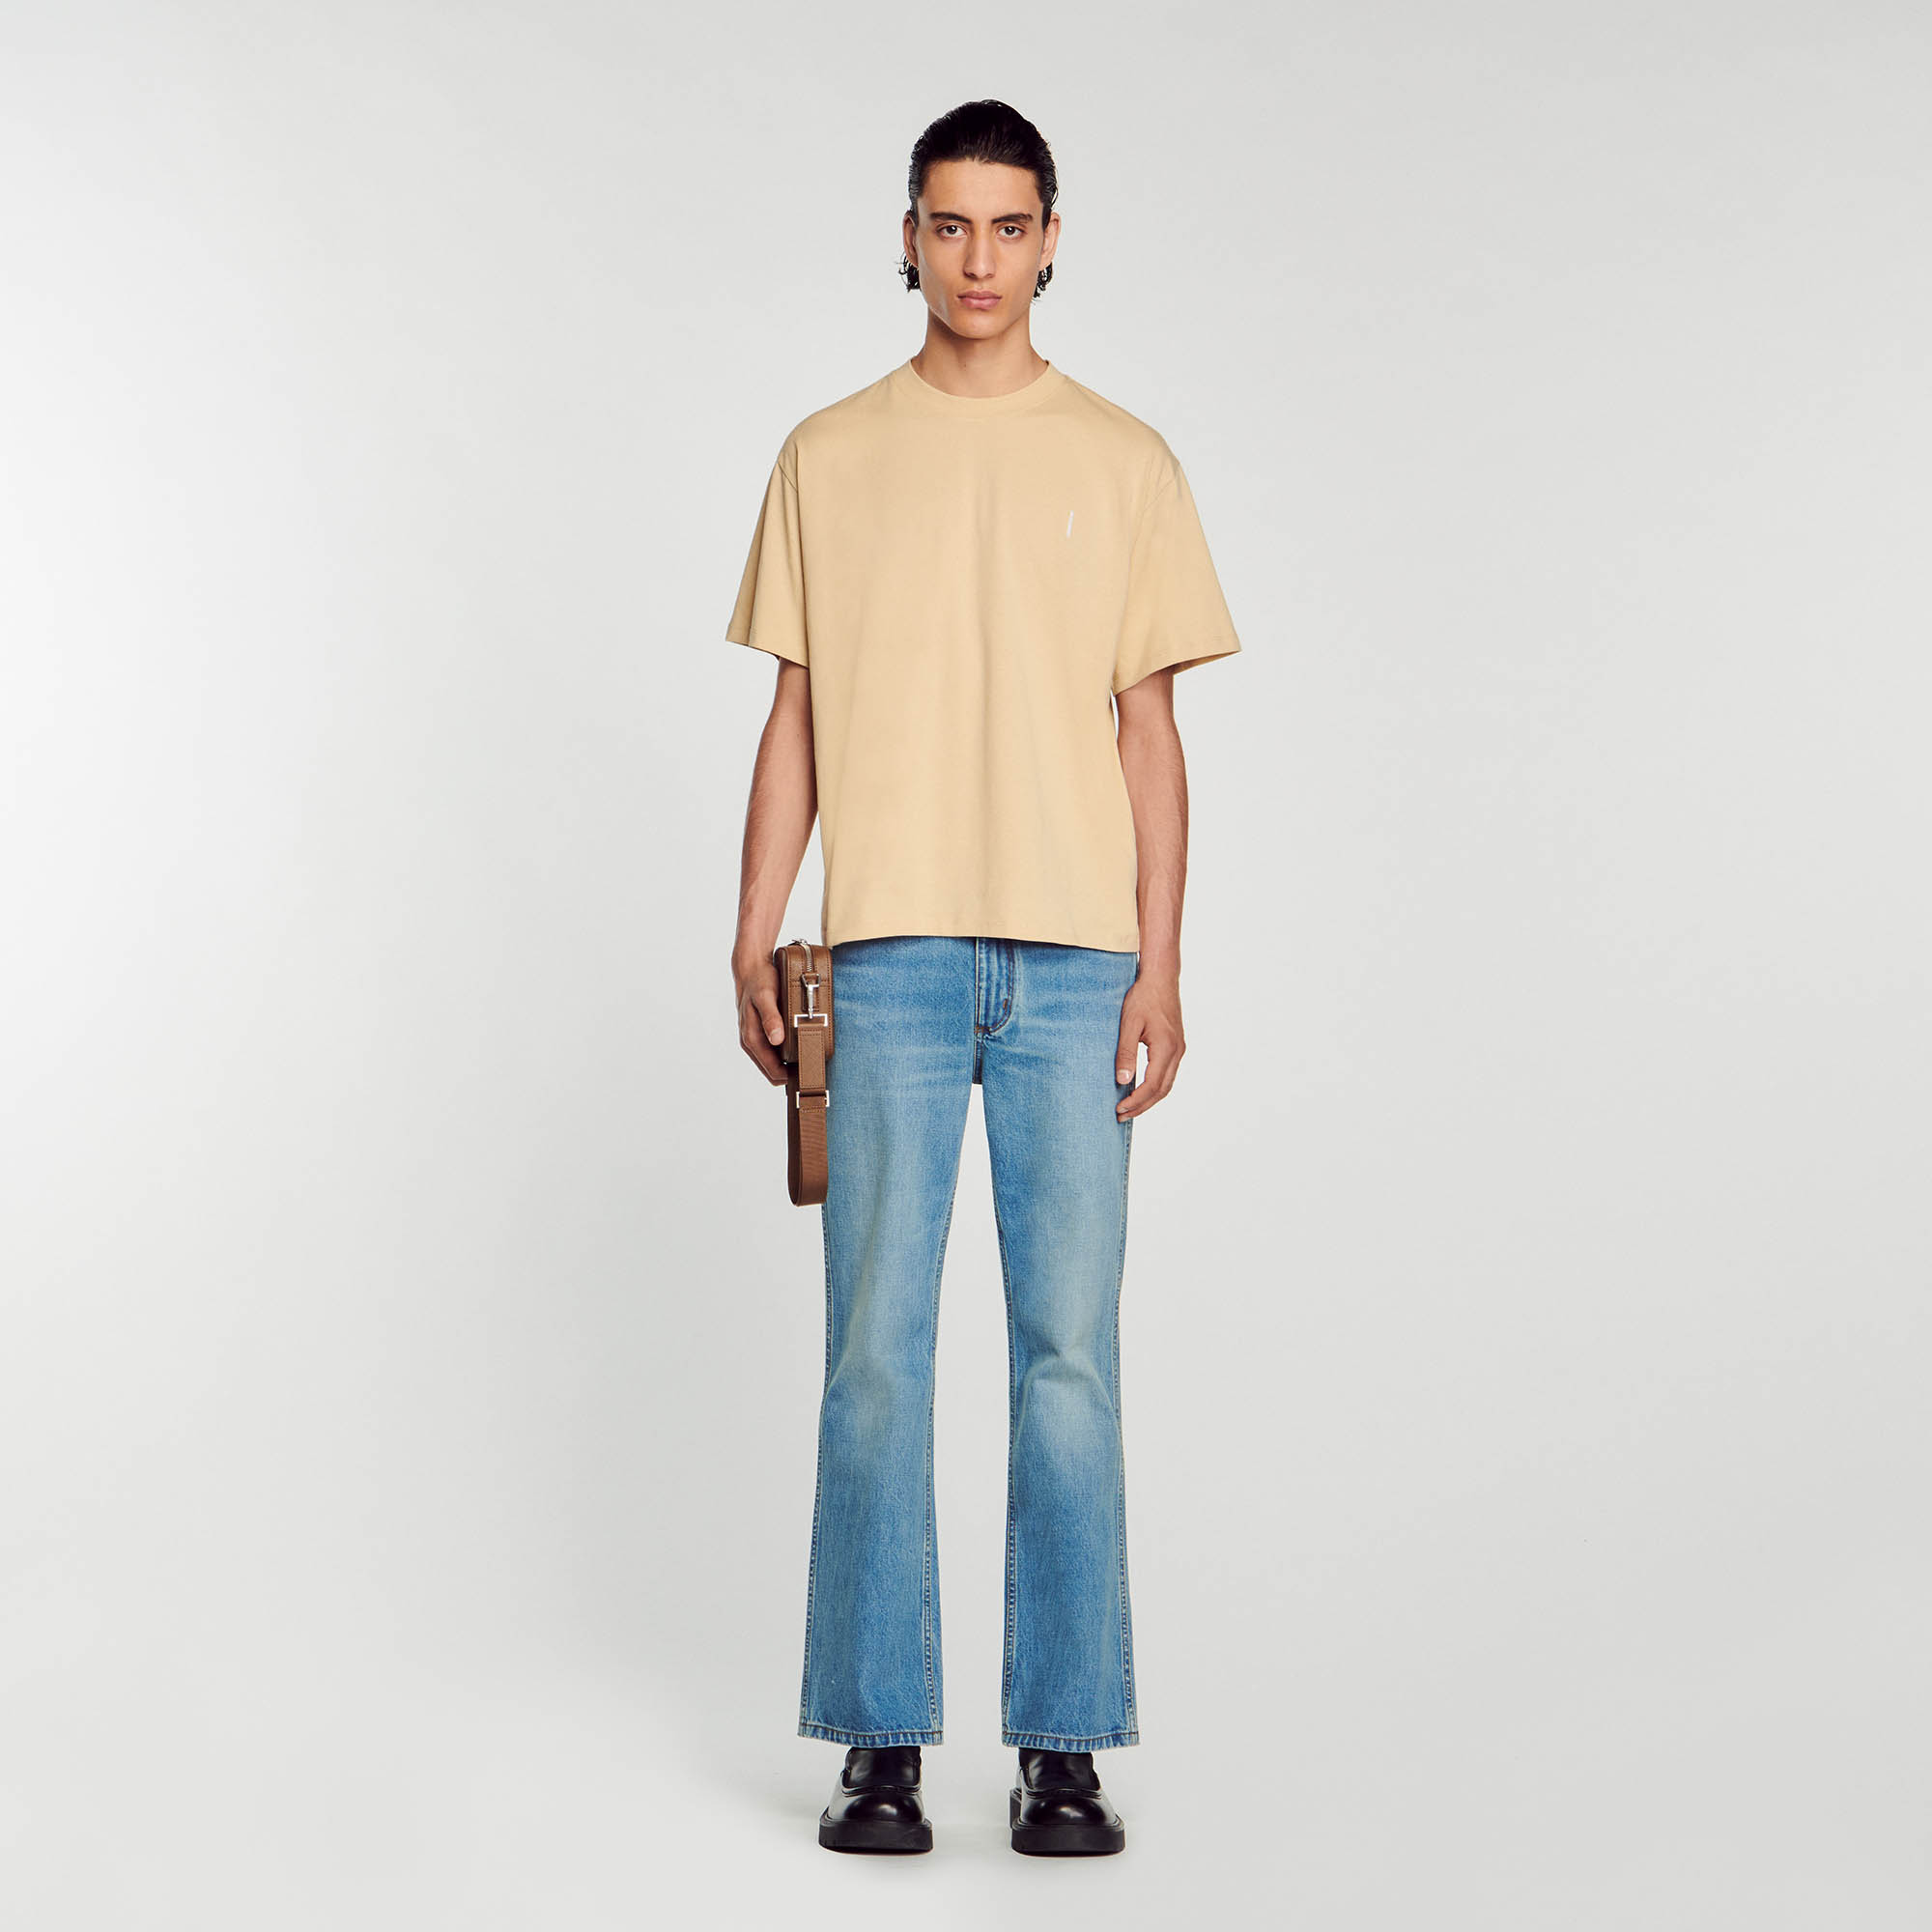 Sandro cotton Embroidery: Oversized cotton T-shirt with a round neck, short sleeves, and vertical Sandro embroidery